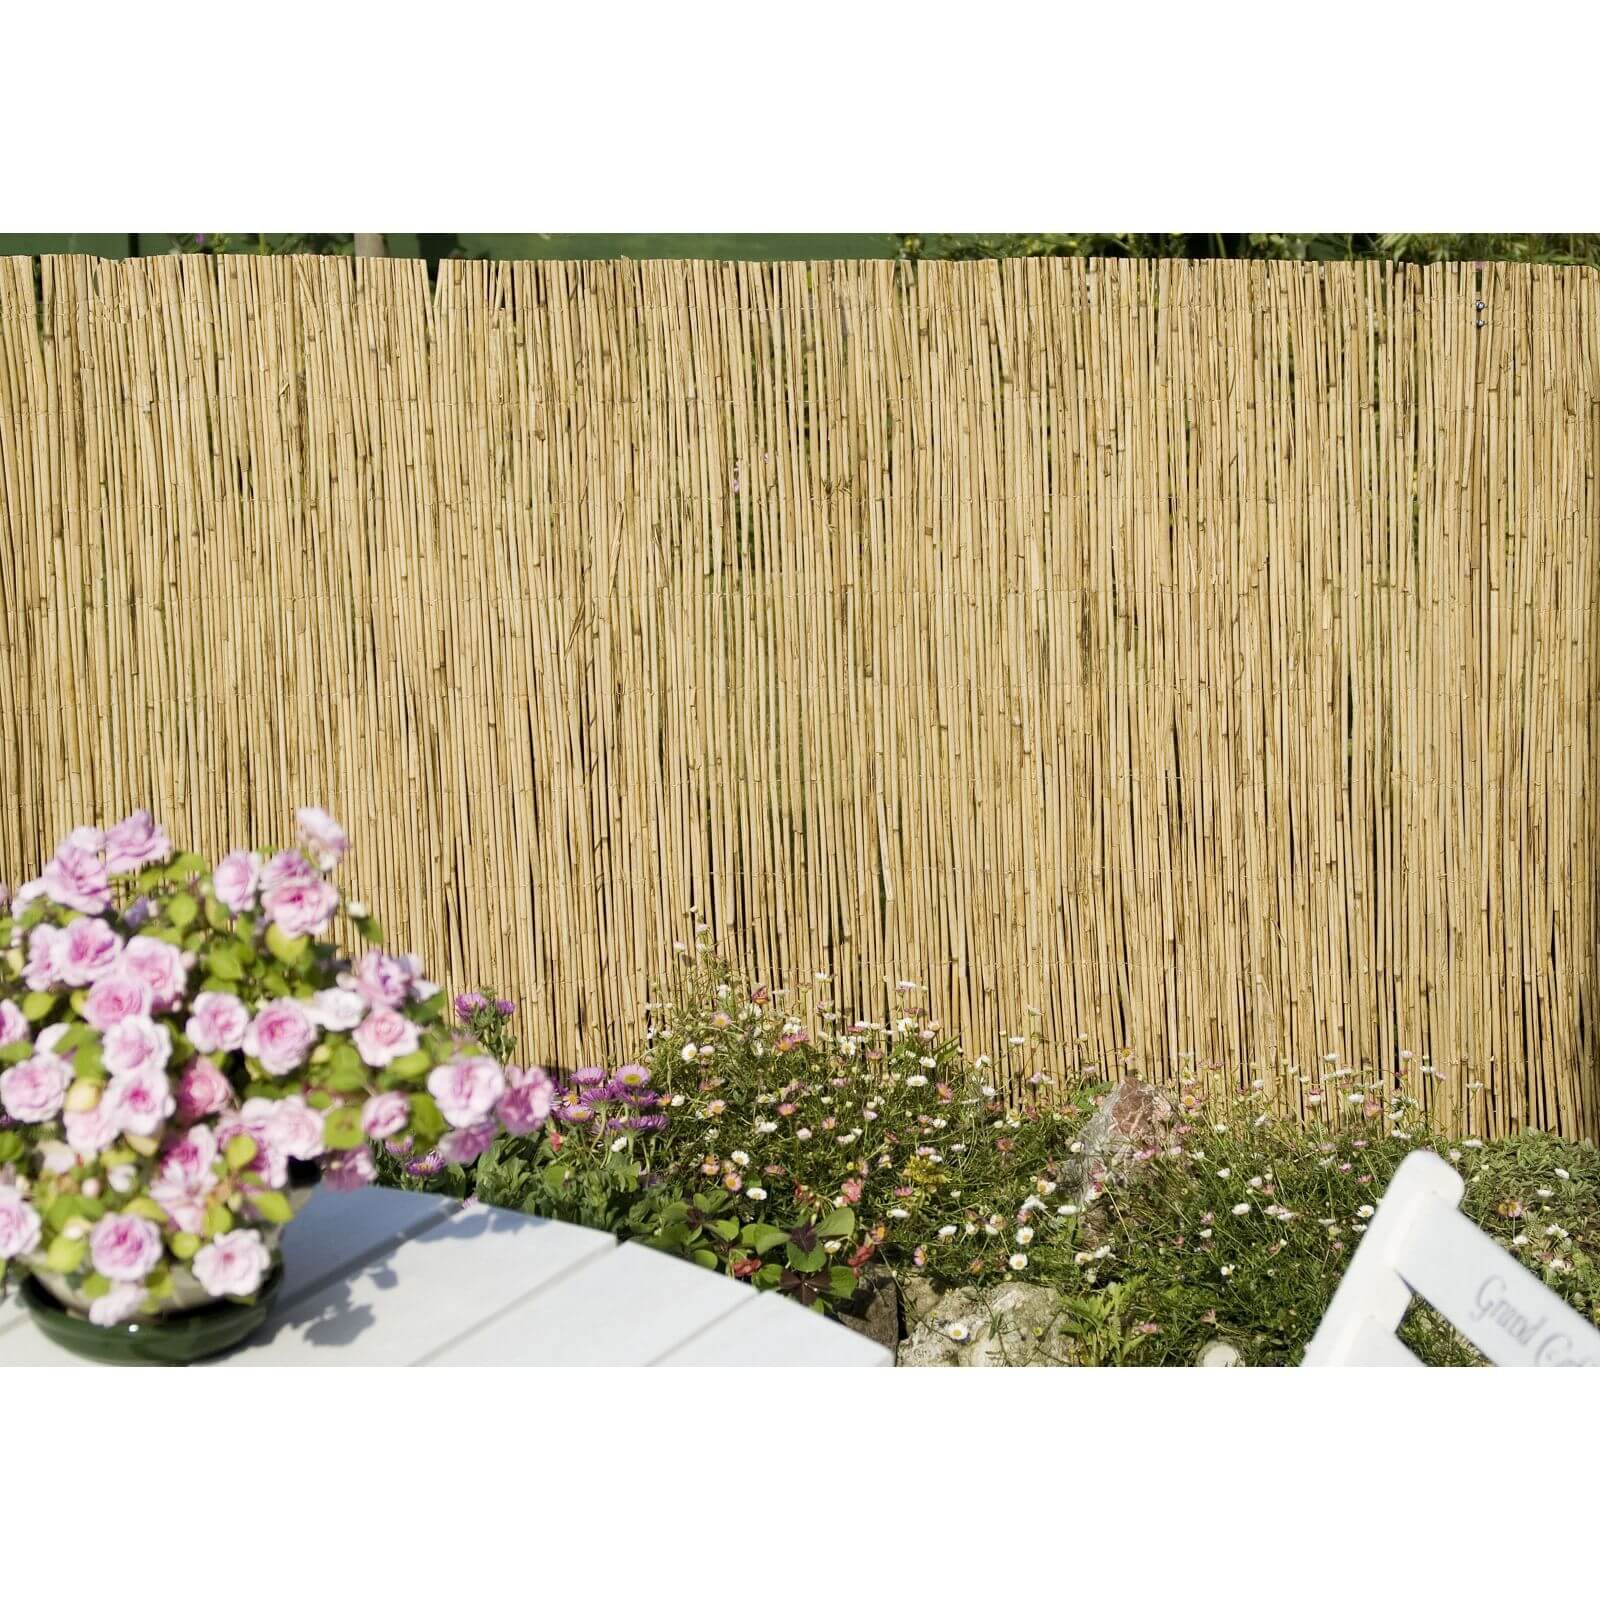 Photo of Homebase Sprout Reed Garden Screening - 4 X 1m